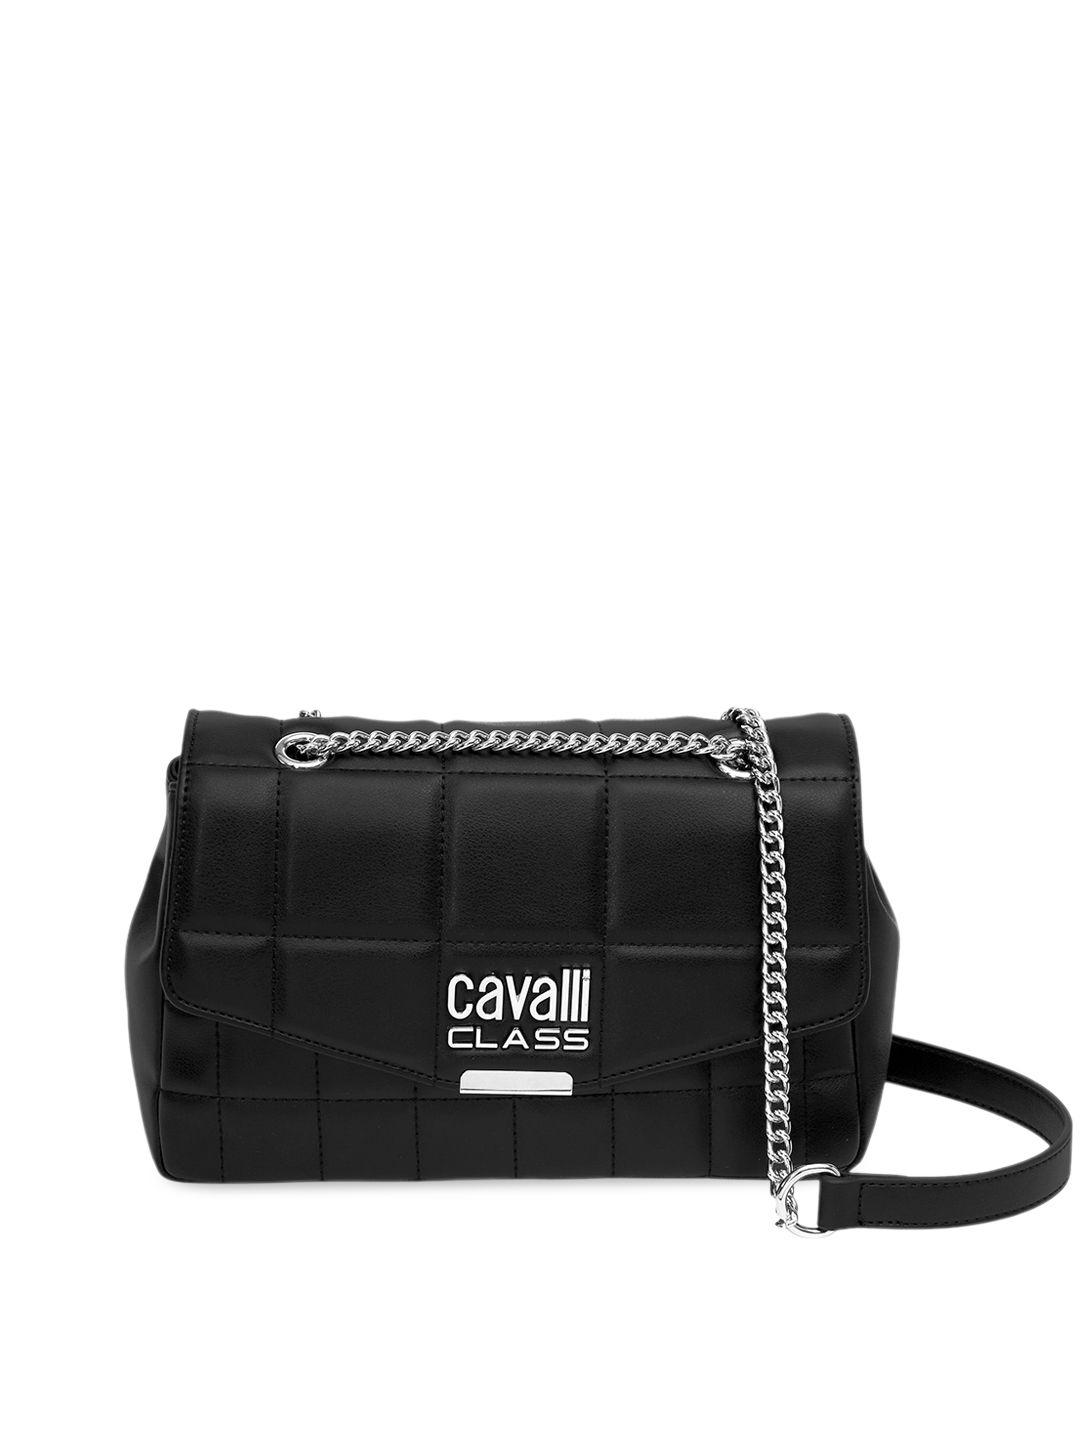 cavalli class textured structured sling bag with quilted